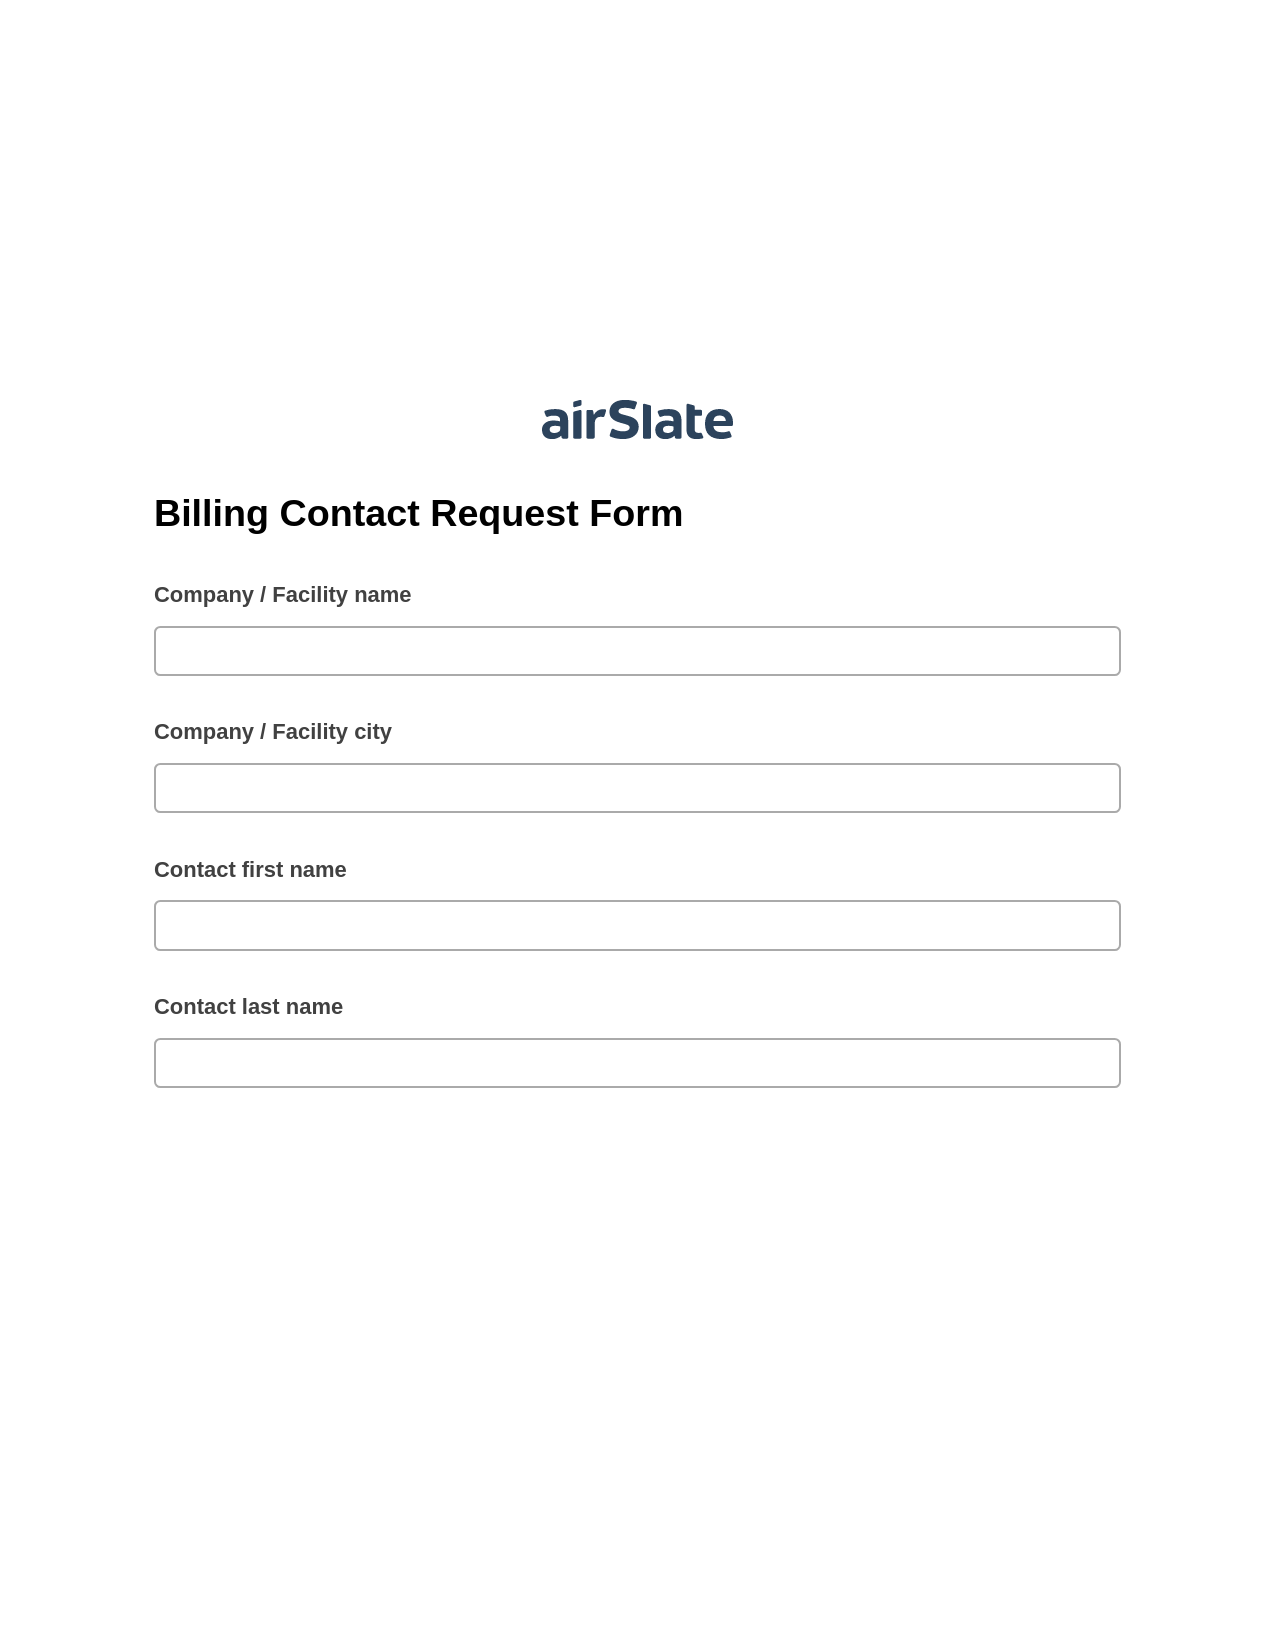 Billing Contact Request Form Pre-fill Dropdown from Airtable, Update MS Dynamics 365 Records Bot, Box Bot